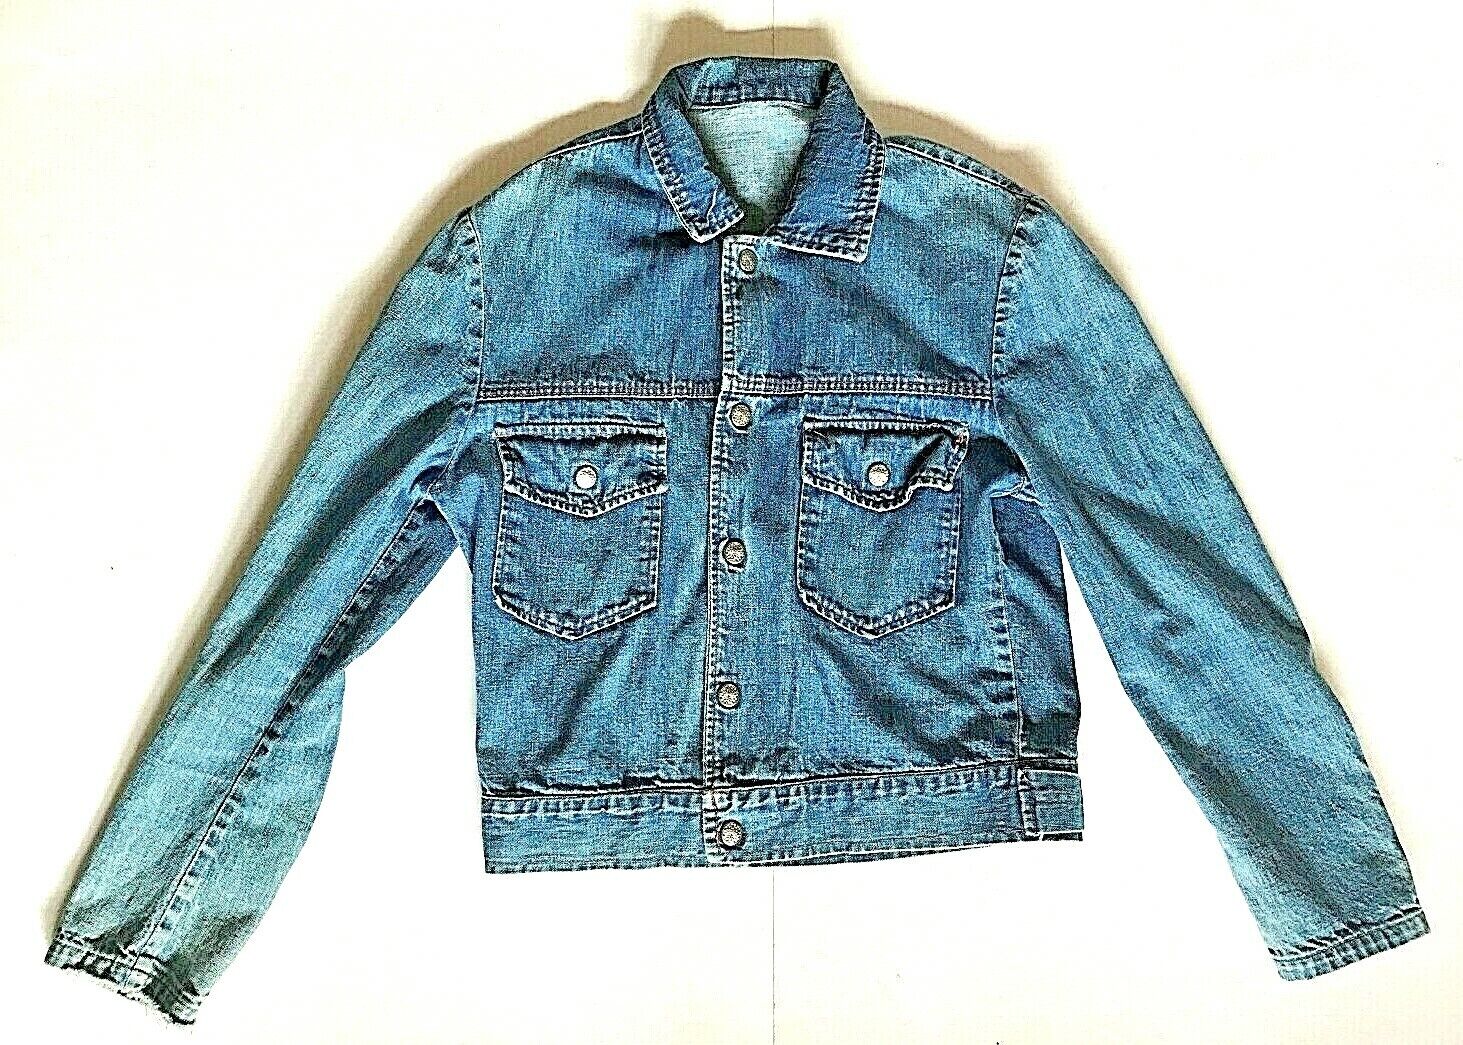 VINTAGE FOREMOST OR JCPENNY DENIM JACKET (1960s 70s) small size